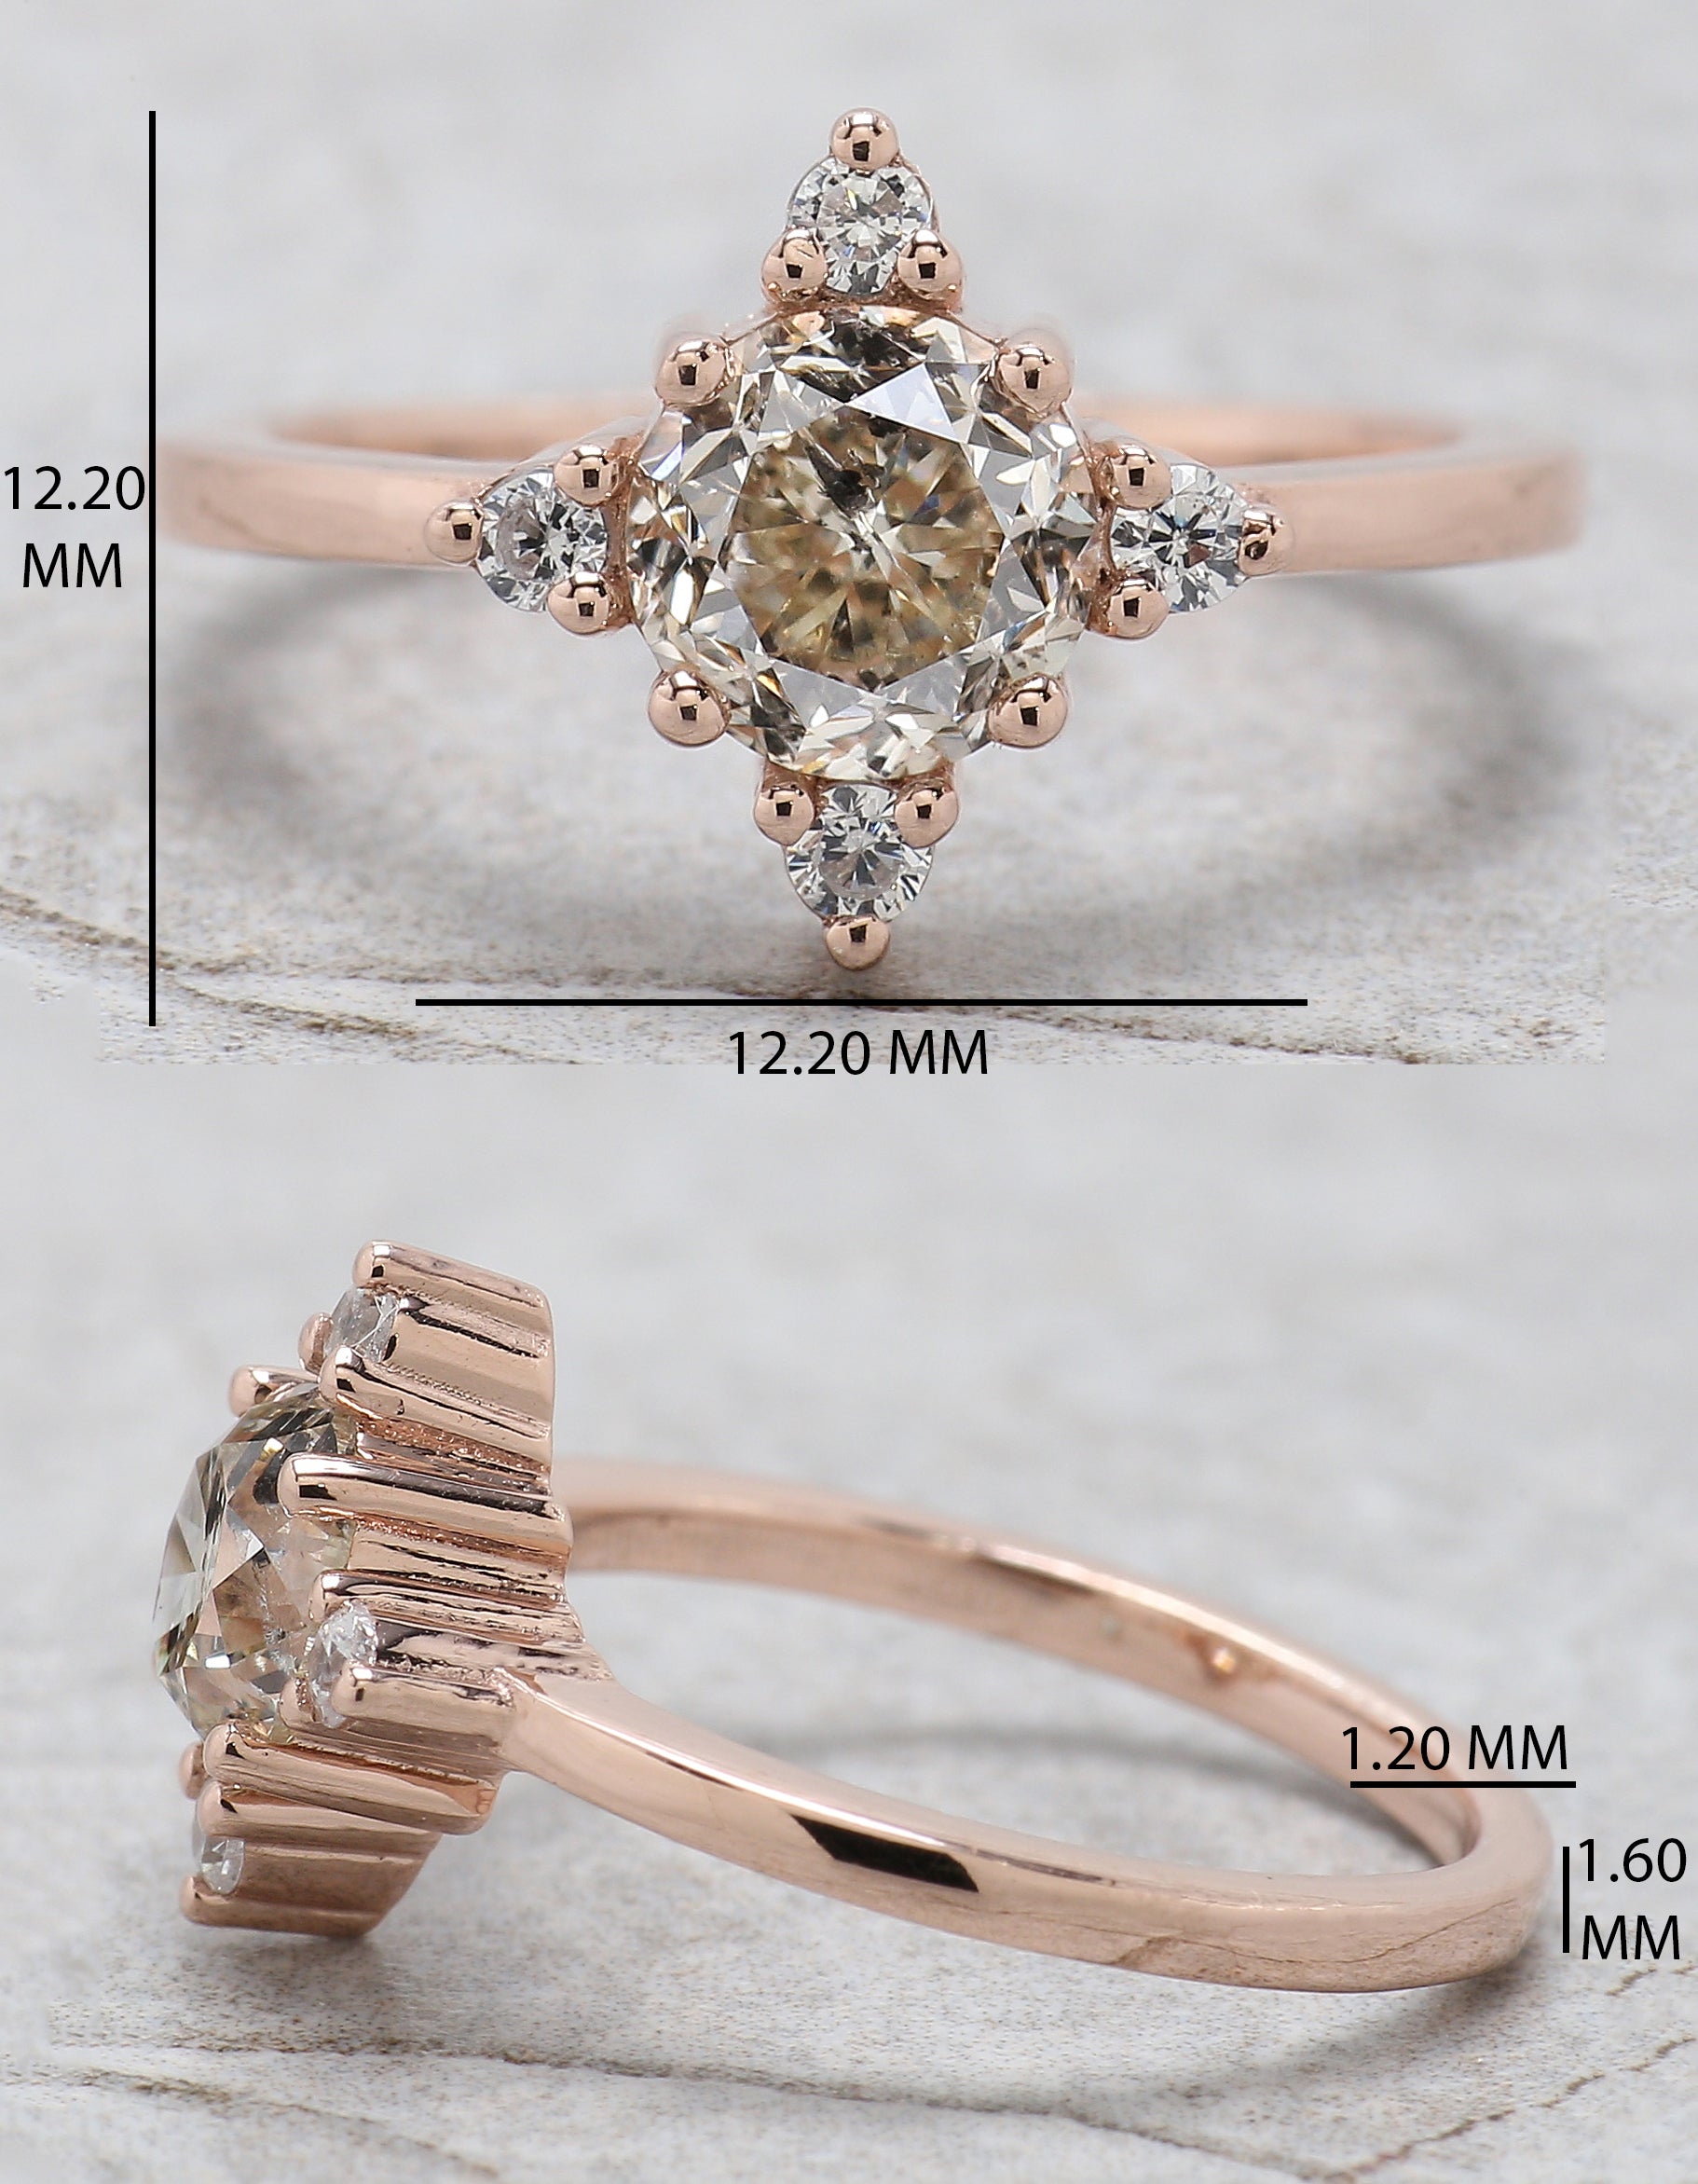 Round Cut Salt And Pepper Diamond Ring 1.25 Ct 6.45 MM Round Diamond Ring 14K Solid Rose Gold Silver Engagement Ring Gift For Her QL2646